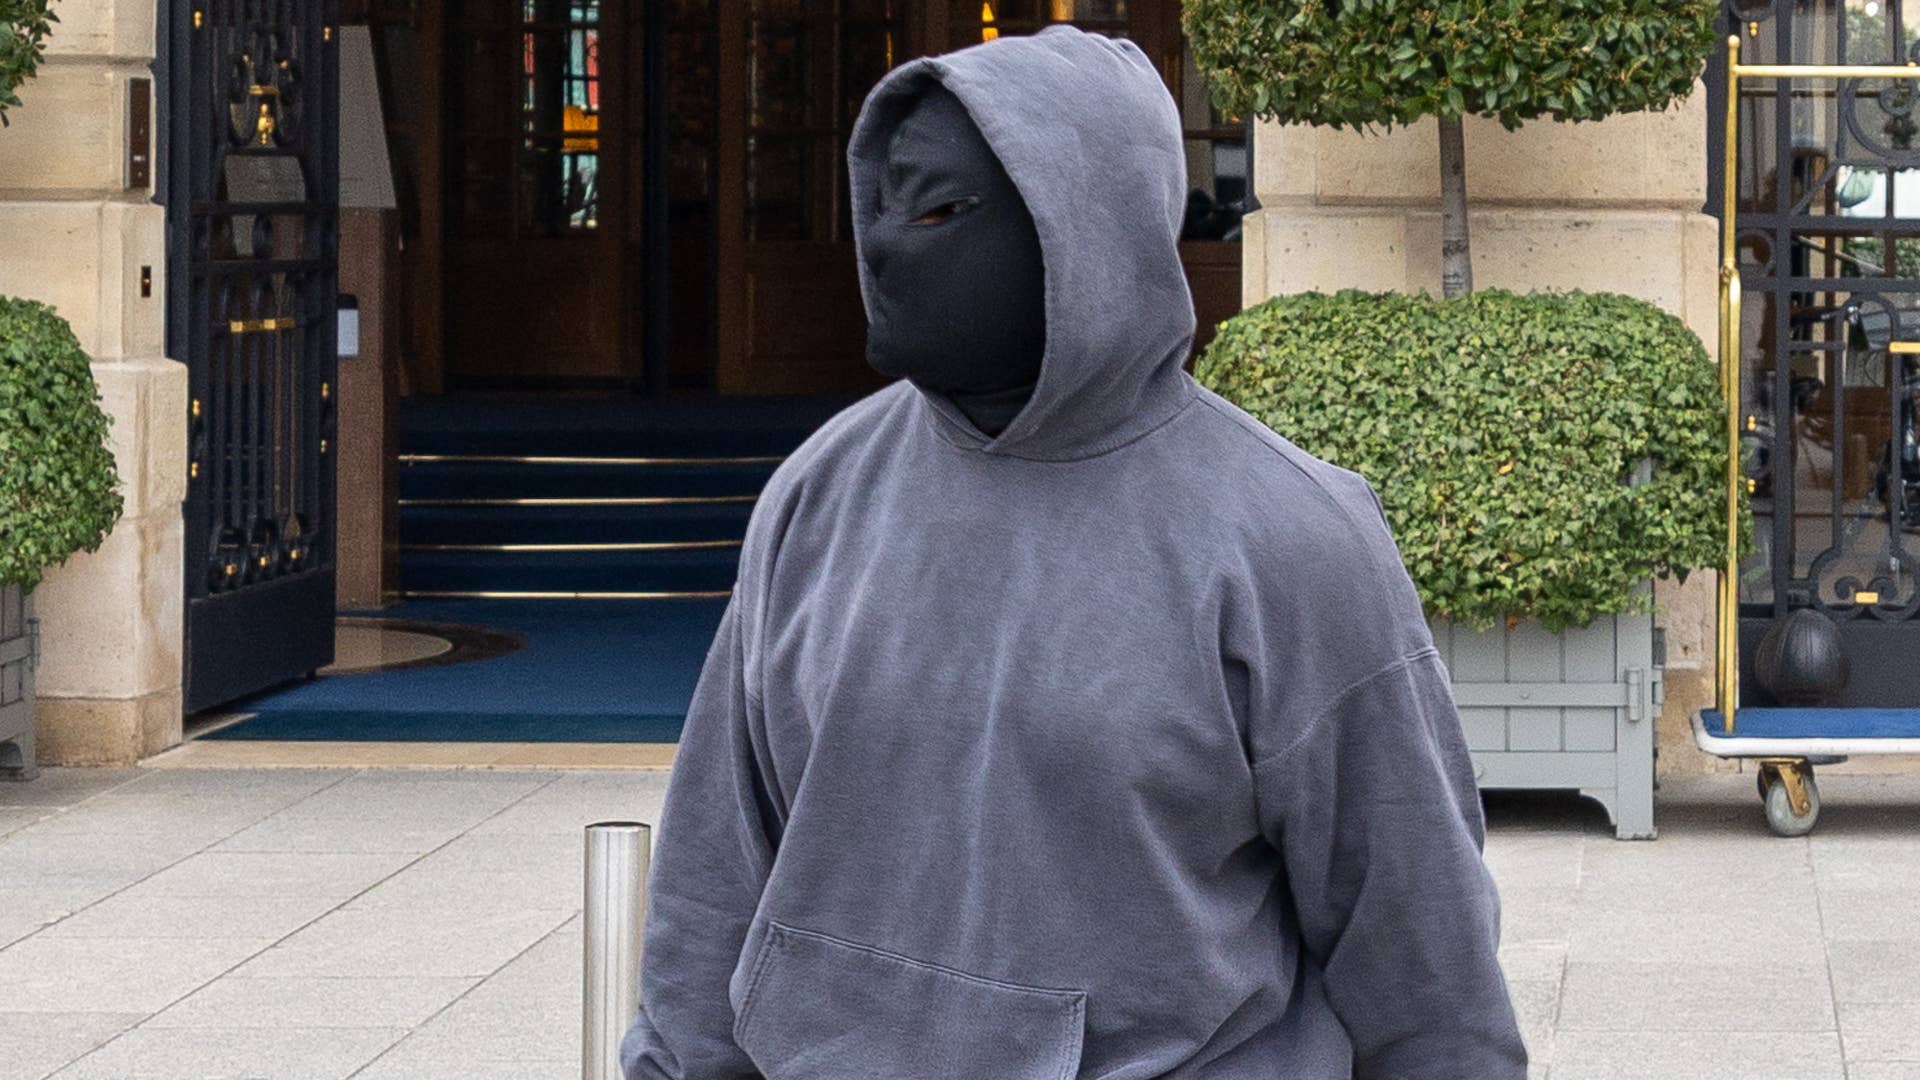 The artist formerly known as Kanye is seen in a mask and hoodie